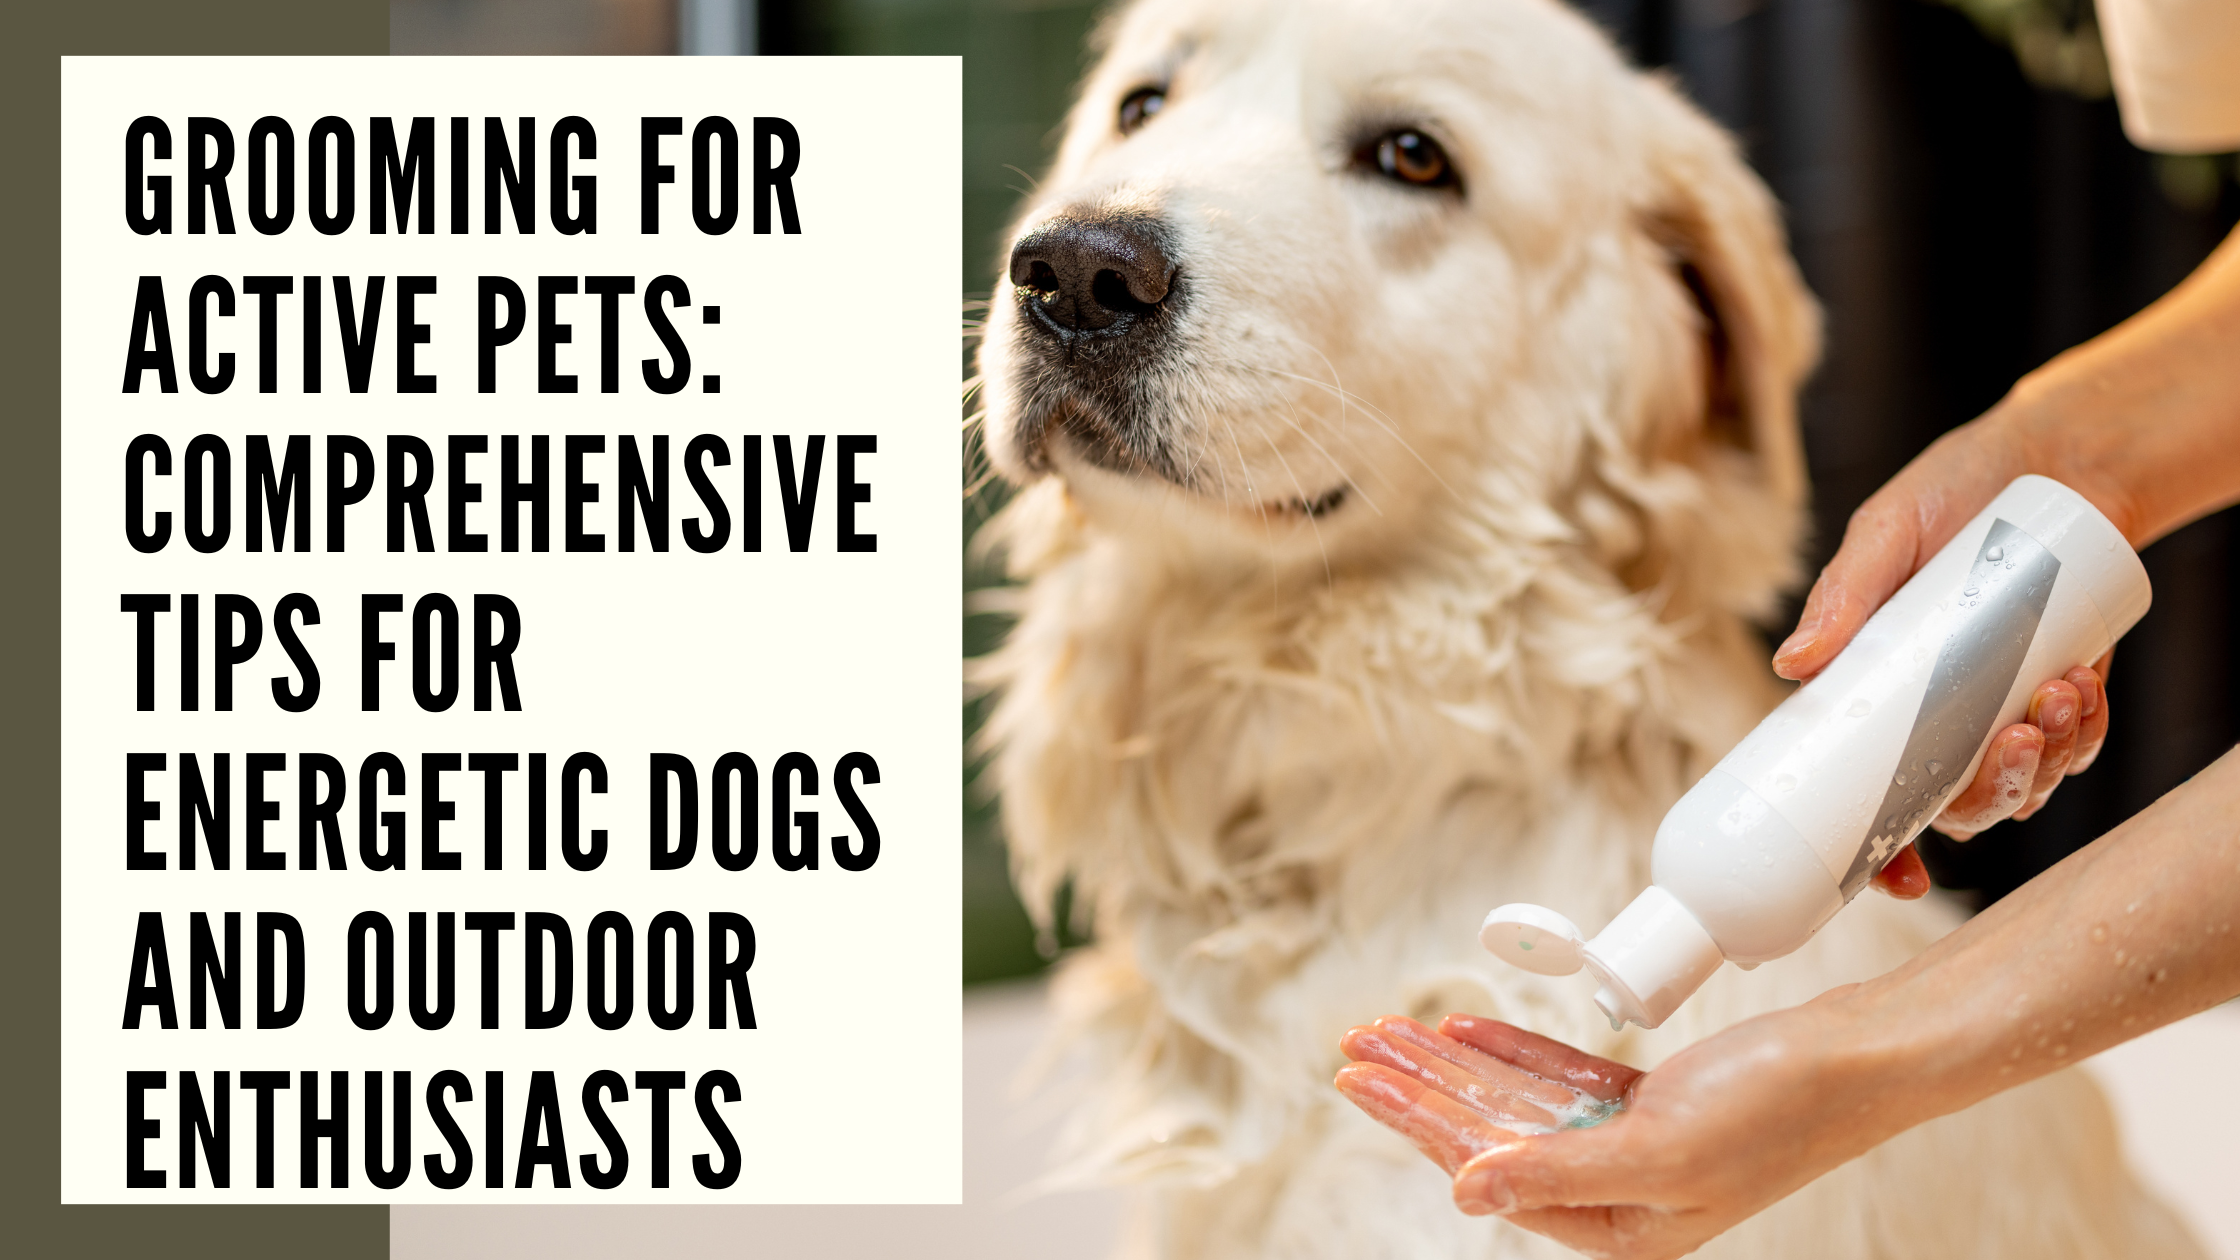 Grooming for Active Pets Comprehensive Tips for Energetic Dogs and Outdoor Enthusiasts